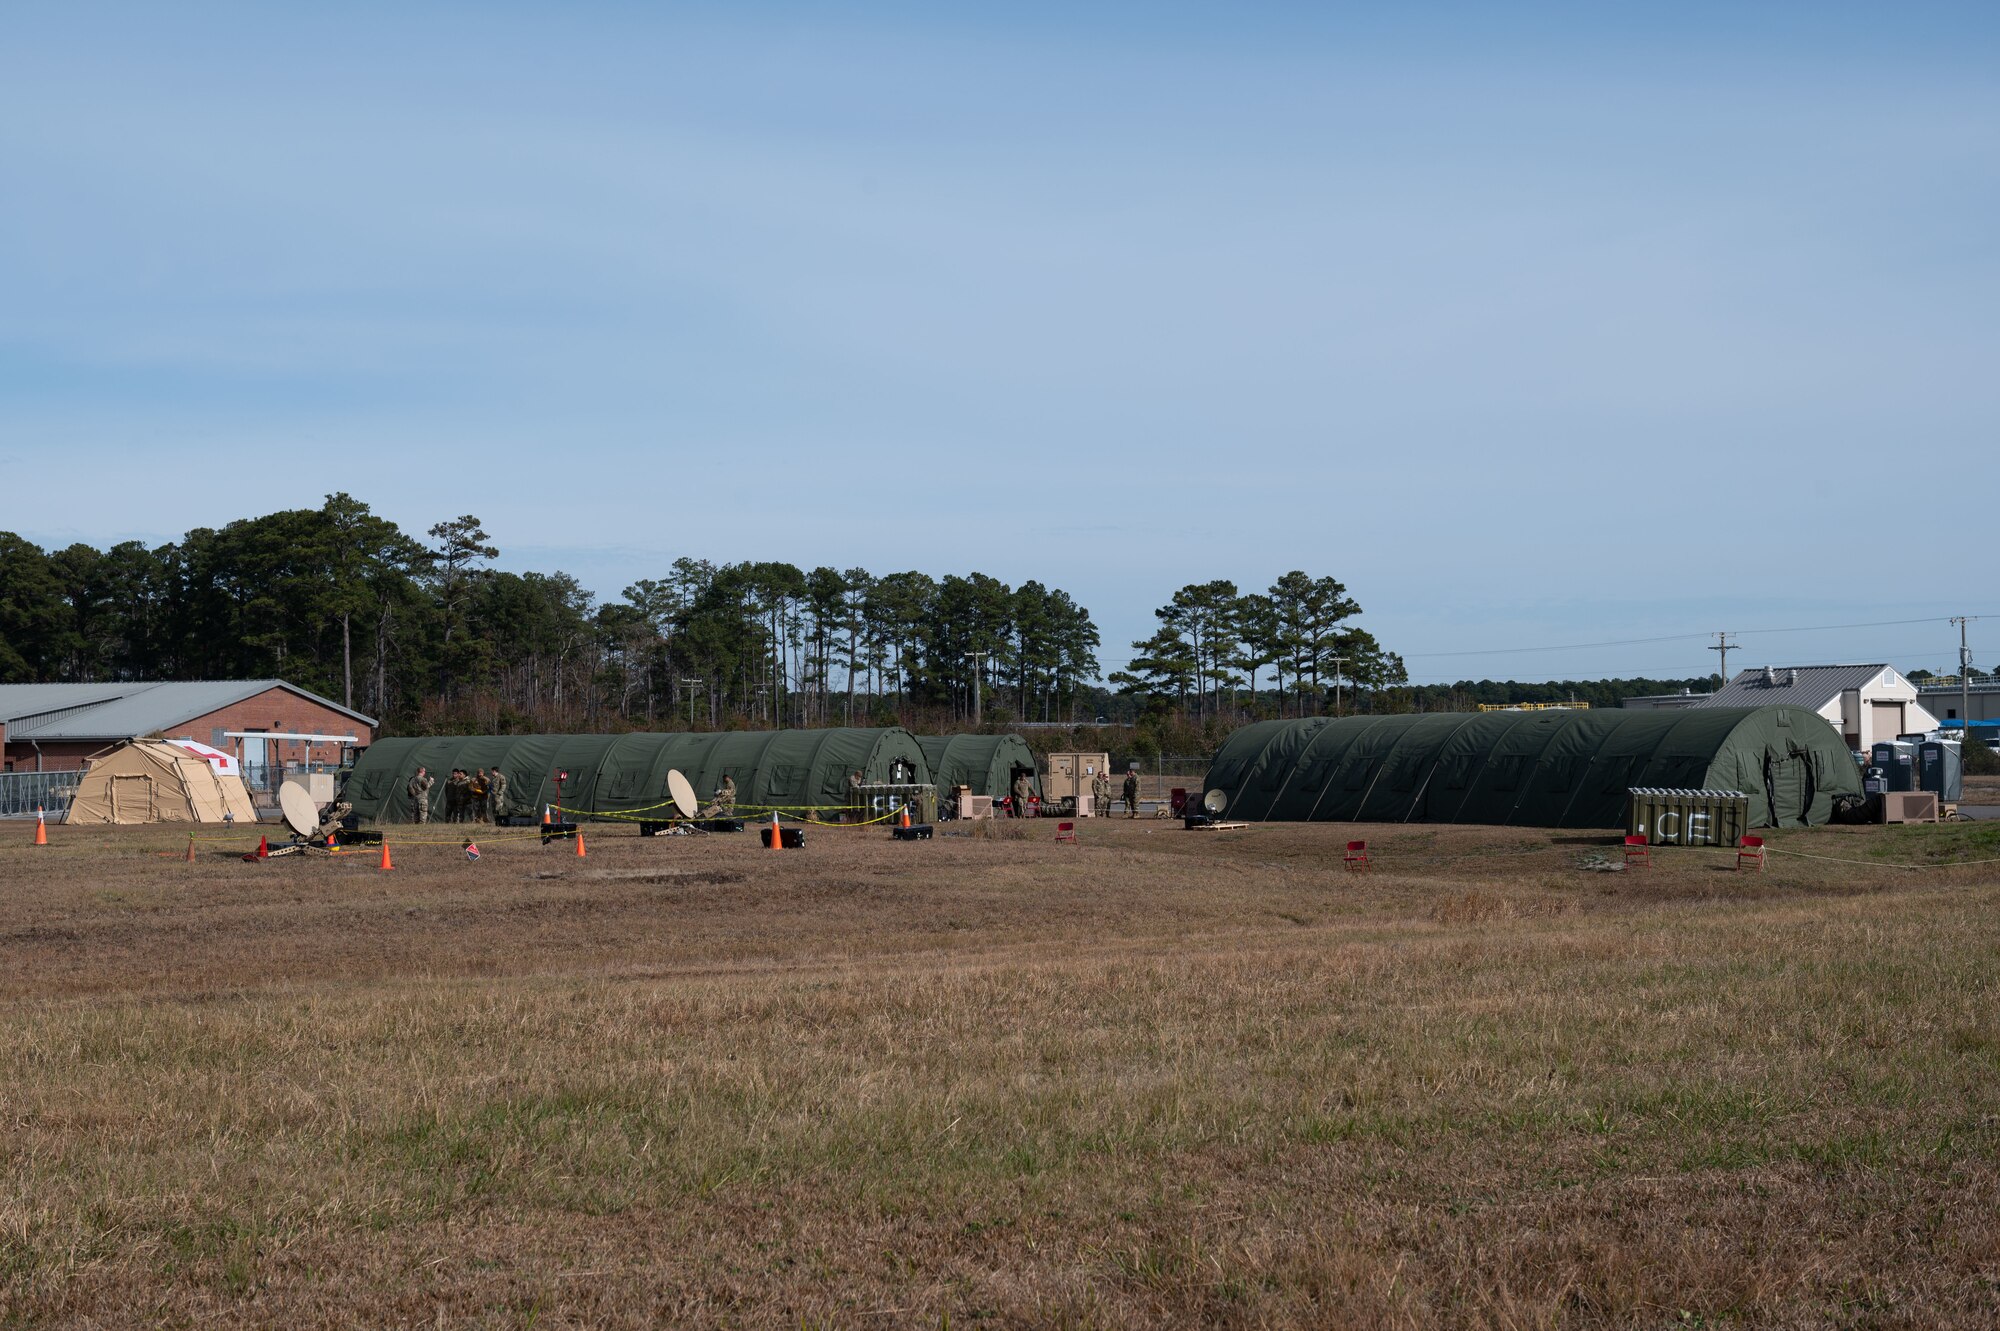 Members of the 4th Fighter Wing, from Seymour Johnson Air Force Base, North Carolina, participate in integrated combat turns during Agile Cub 3 at Marine Corps Air Station Cherry Point, N.C., Dec. 14, 2022. Agile Cub 3 demonstrated the 4th Fighter Wing’s ability to rapidly deploy and establish operating bases. (U.S. Air Force photo by Airman 1st Class Rebecca Sirimarco-Lang)